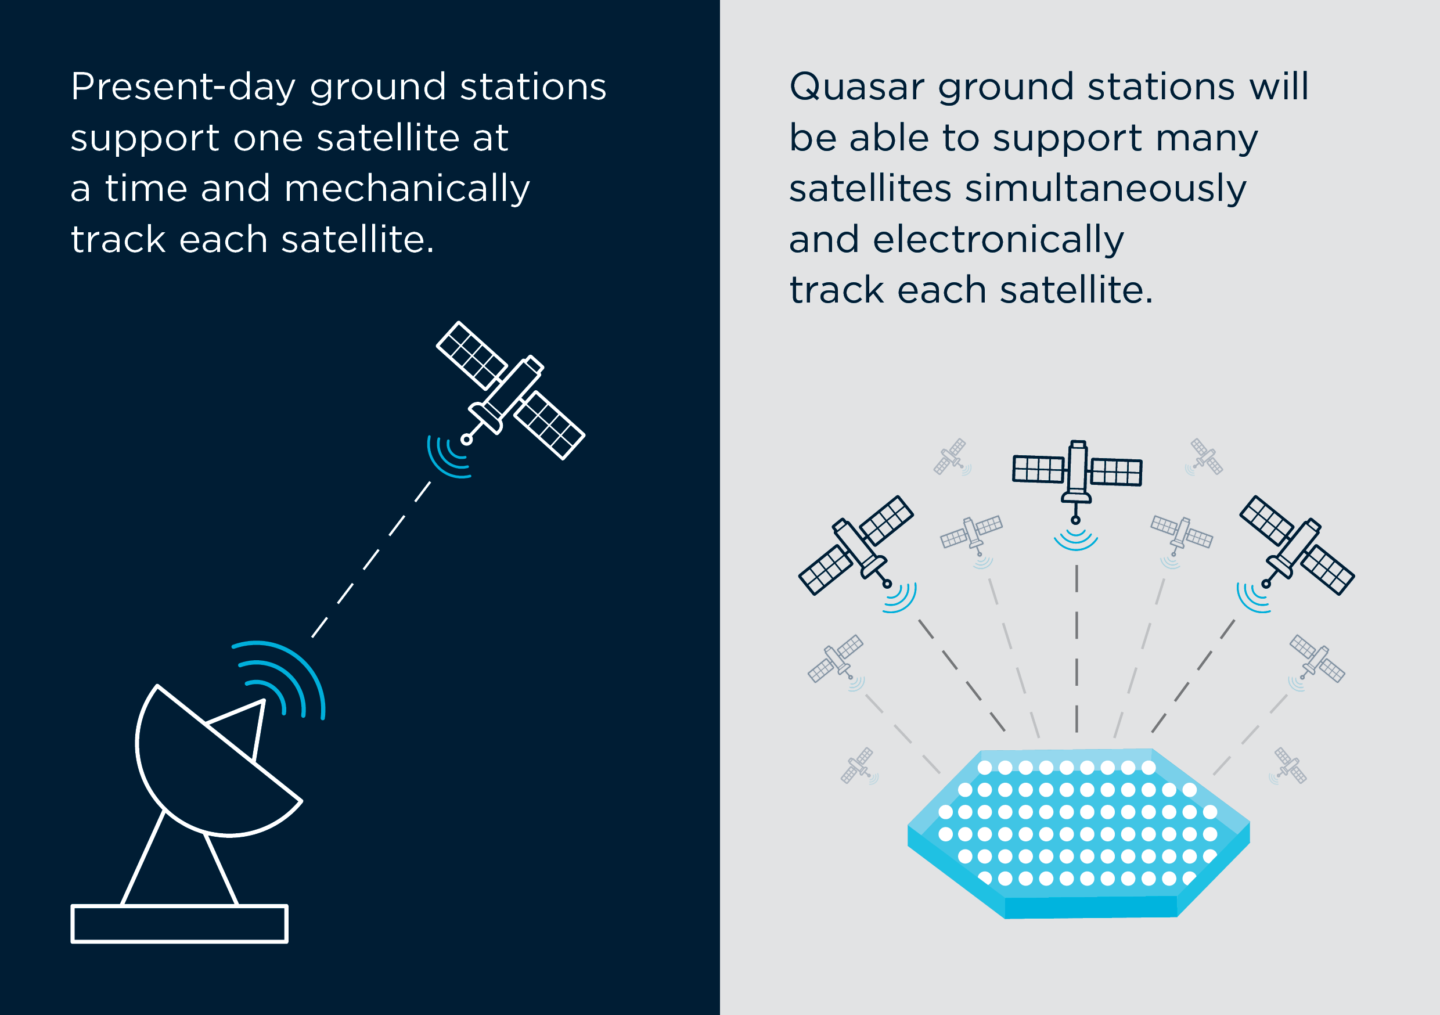 Infographic text reads: “present-day ground stations support one satellite at a time and mechanically track each satellite. Quasar ground stations will be able to support many satellites simultaneously and electronically track each satellite. ”